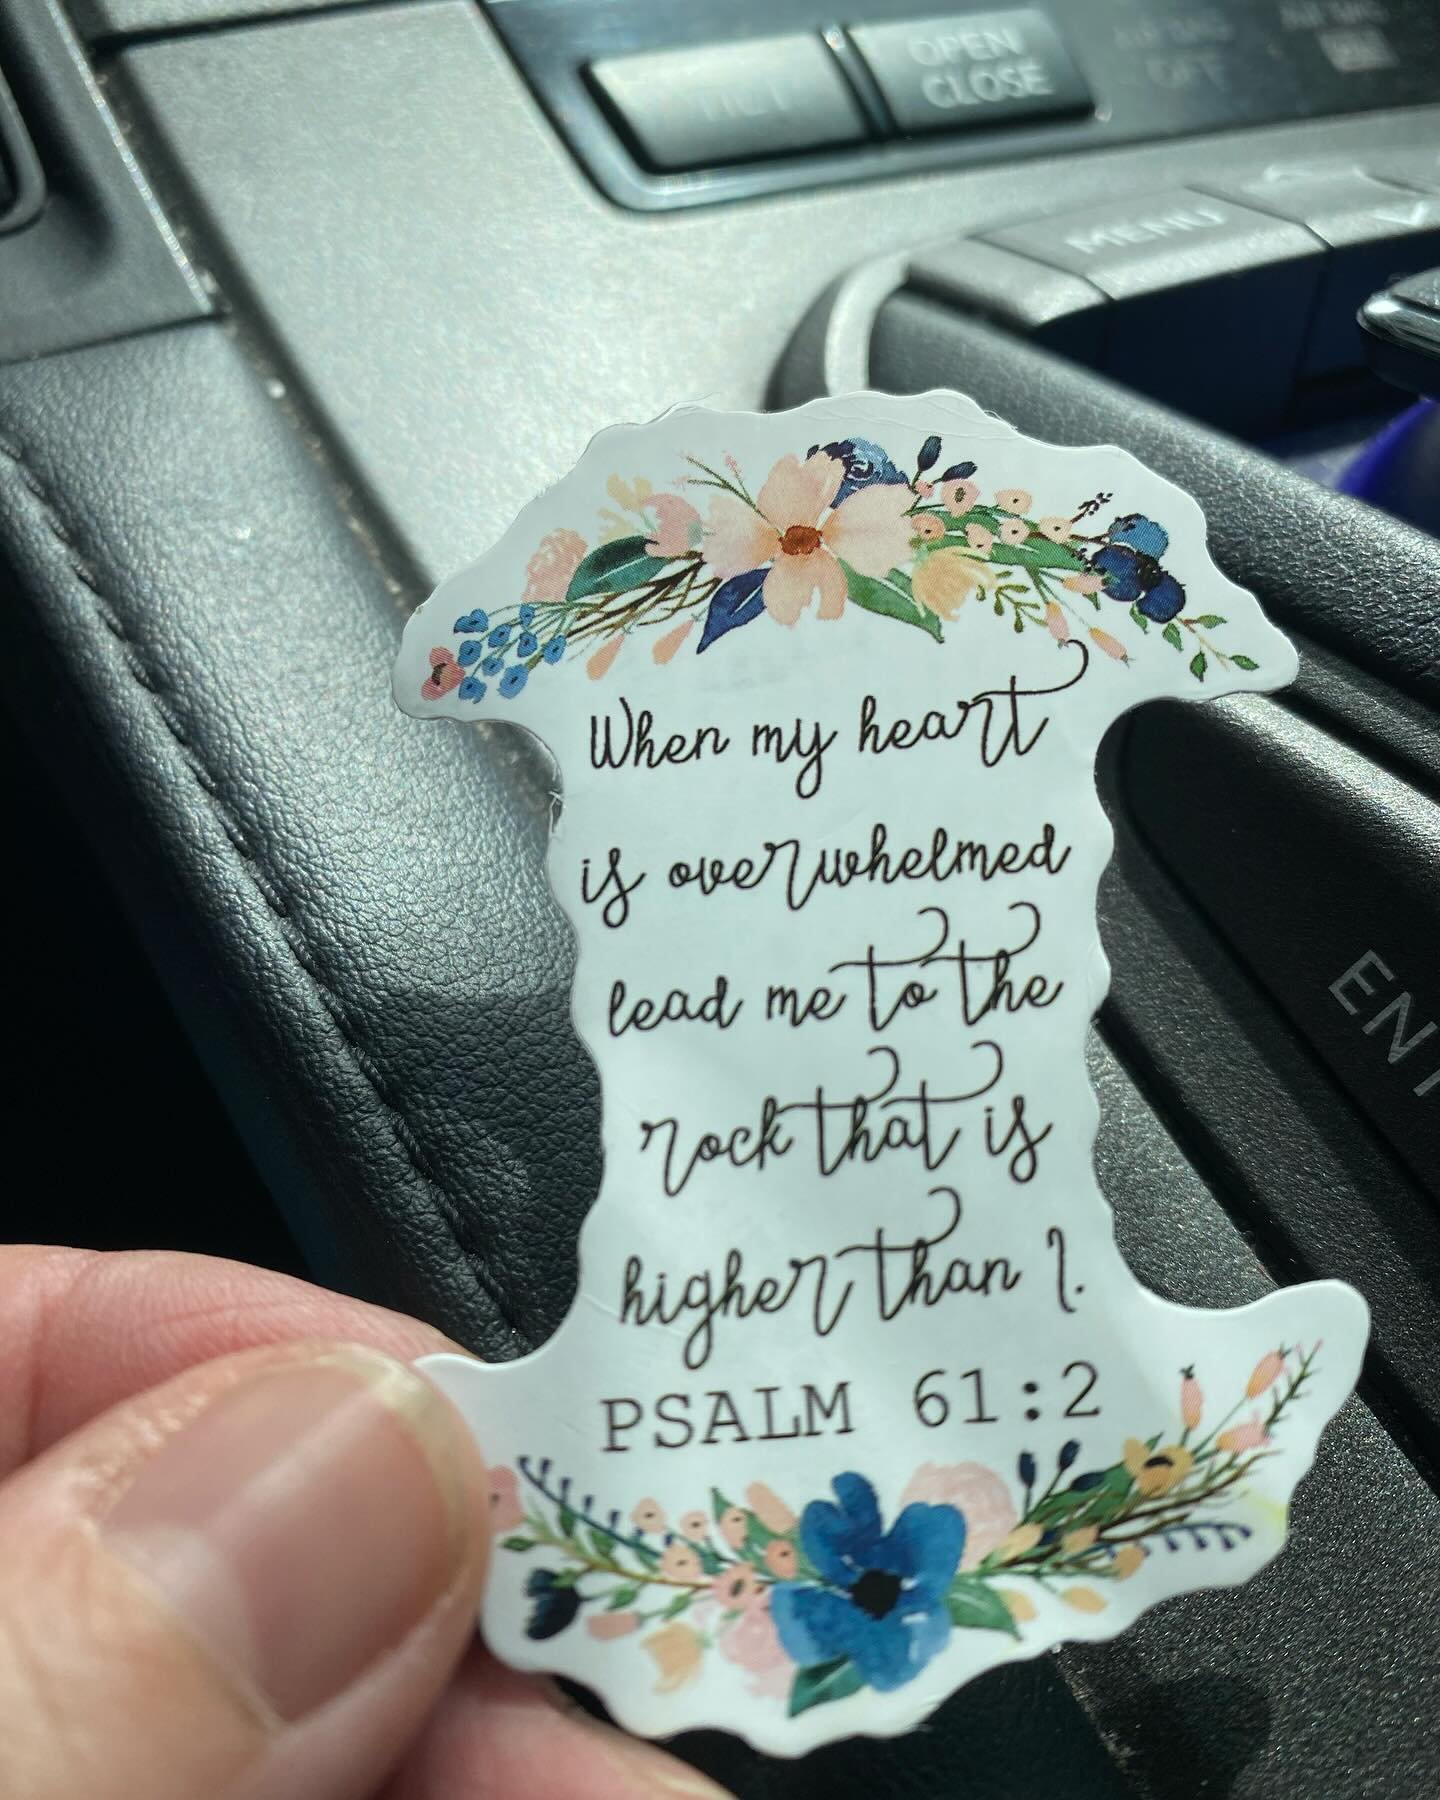 I was flustered. A number of circumstances had colluded that created a bit of a perfect storm. As I leaped into the car, hoping that I had everything I needed for my next appointment, this sticker fell out of my knapsack onto my lap.  I had picked it